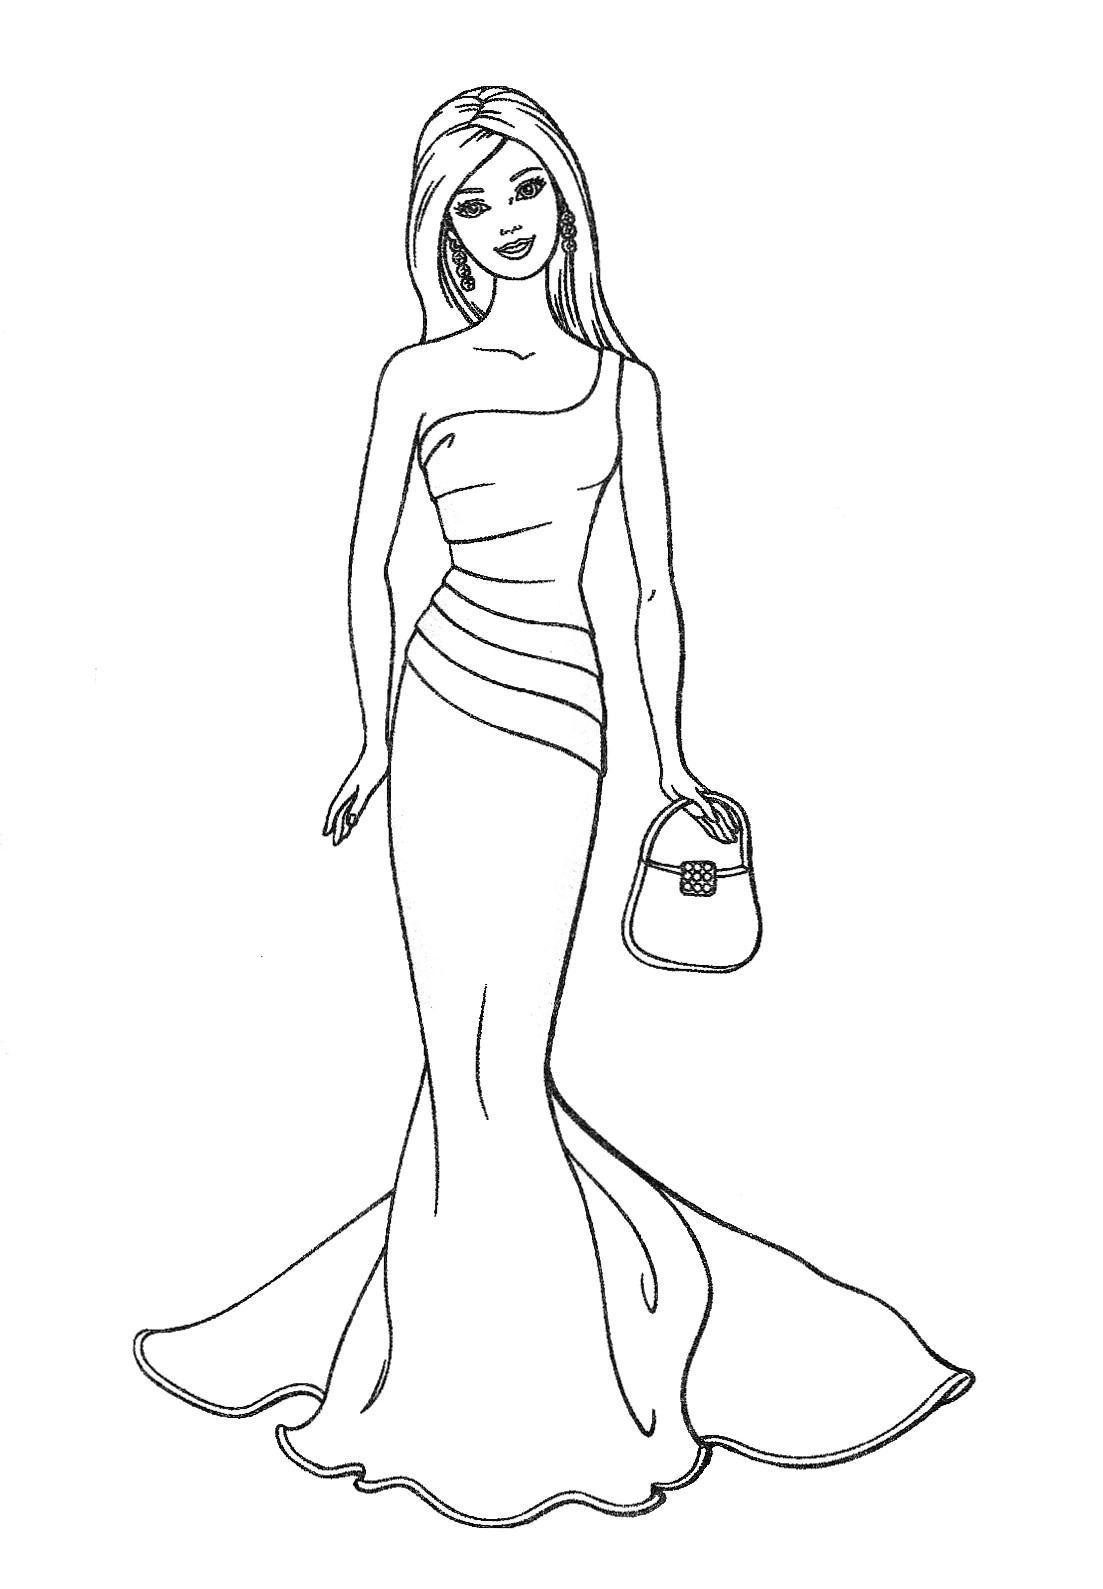 Free Printable Barbie Coloring Pages
 BARBIE COLORING PAGES